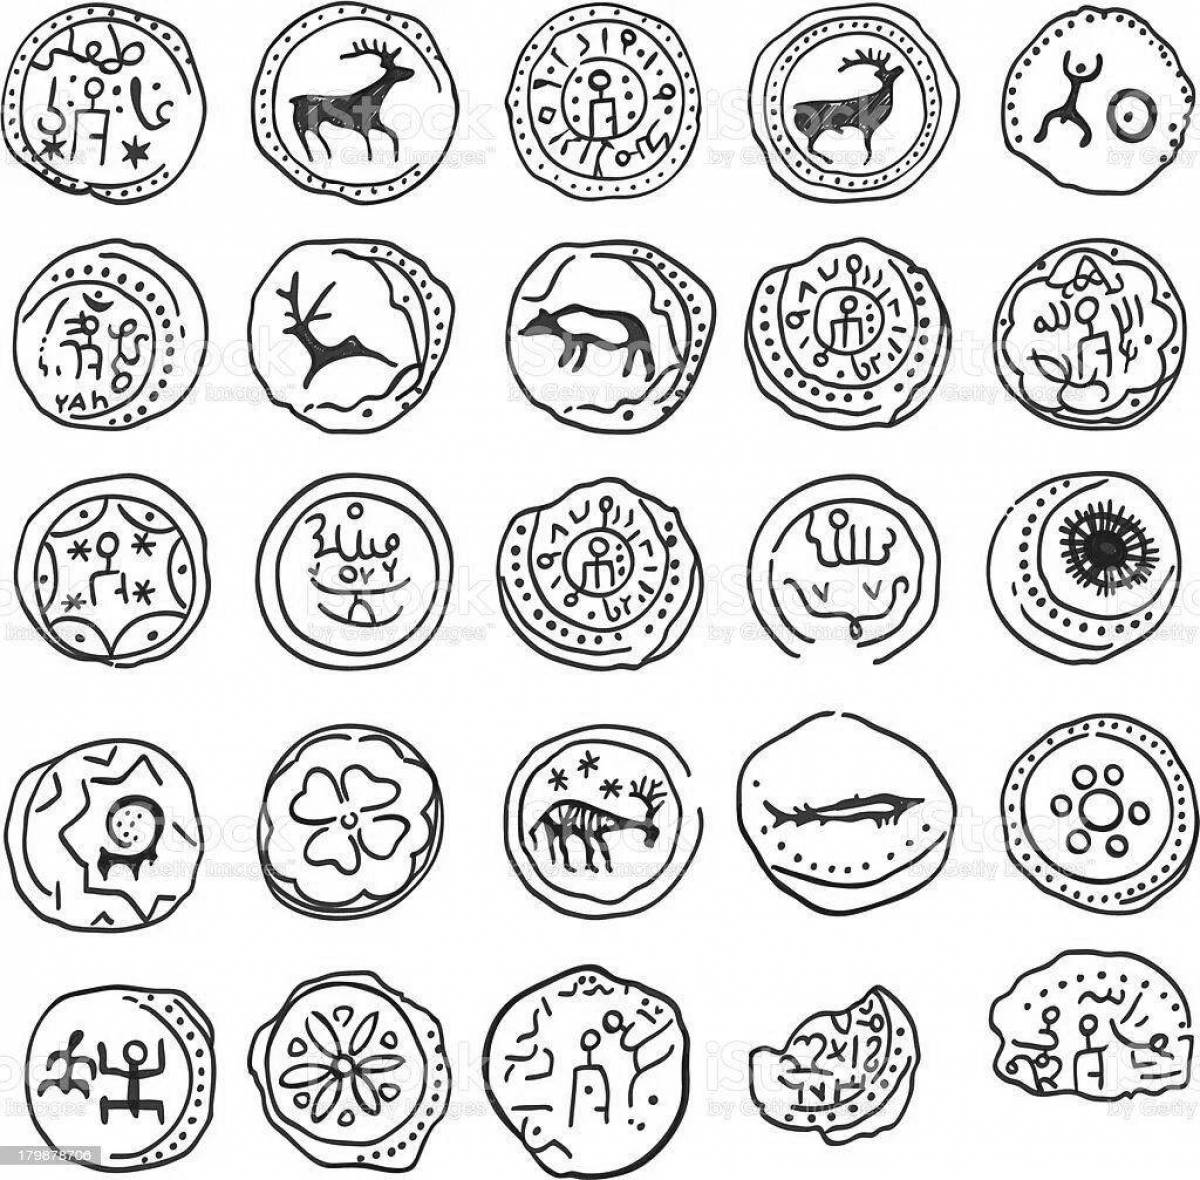 Coin coloring book for kids